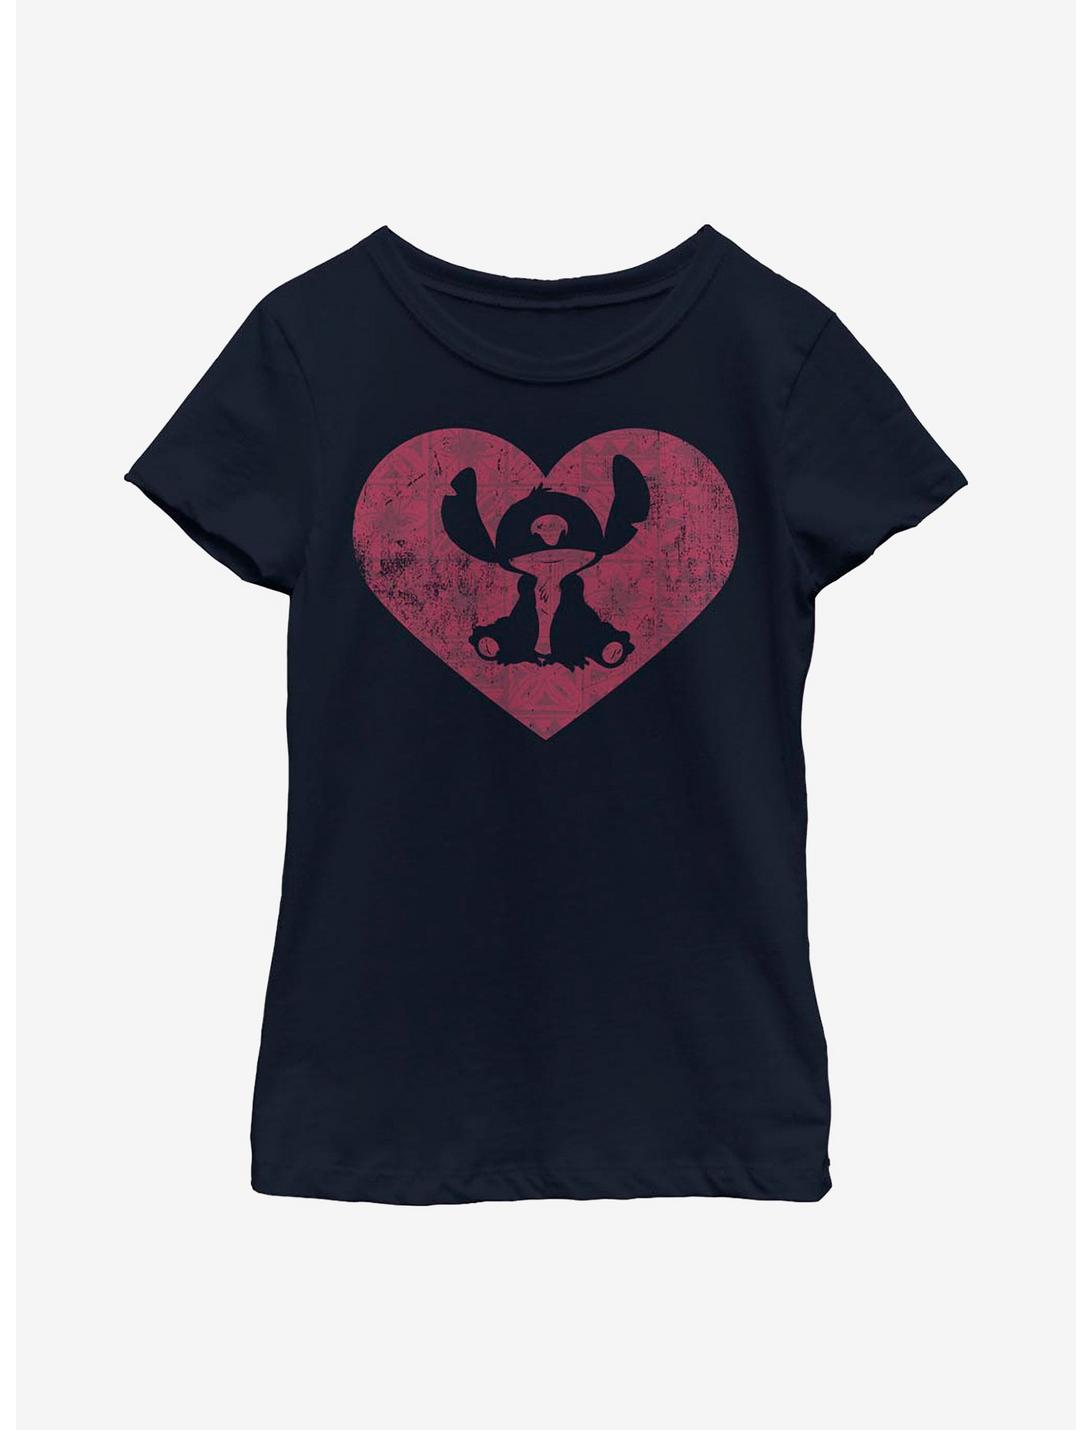 Disney Lilo And Stitch Heart Youth Girls T-Shirt, NAVY, hi-res